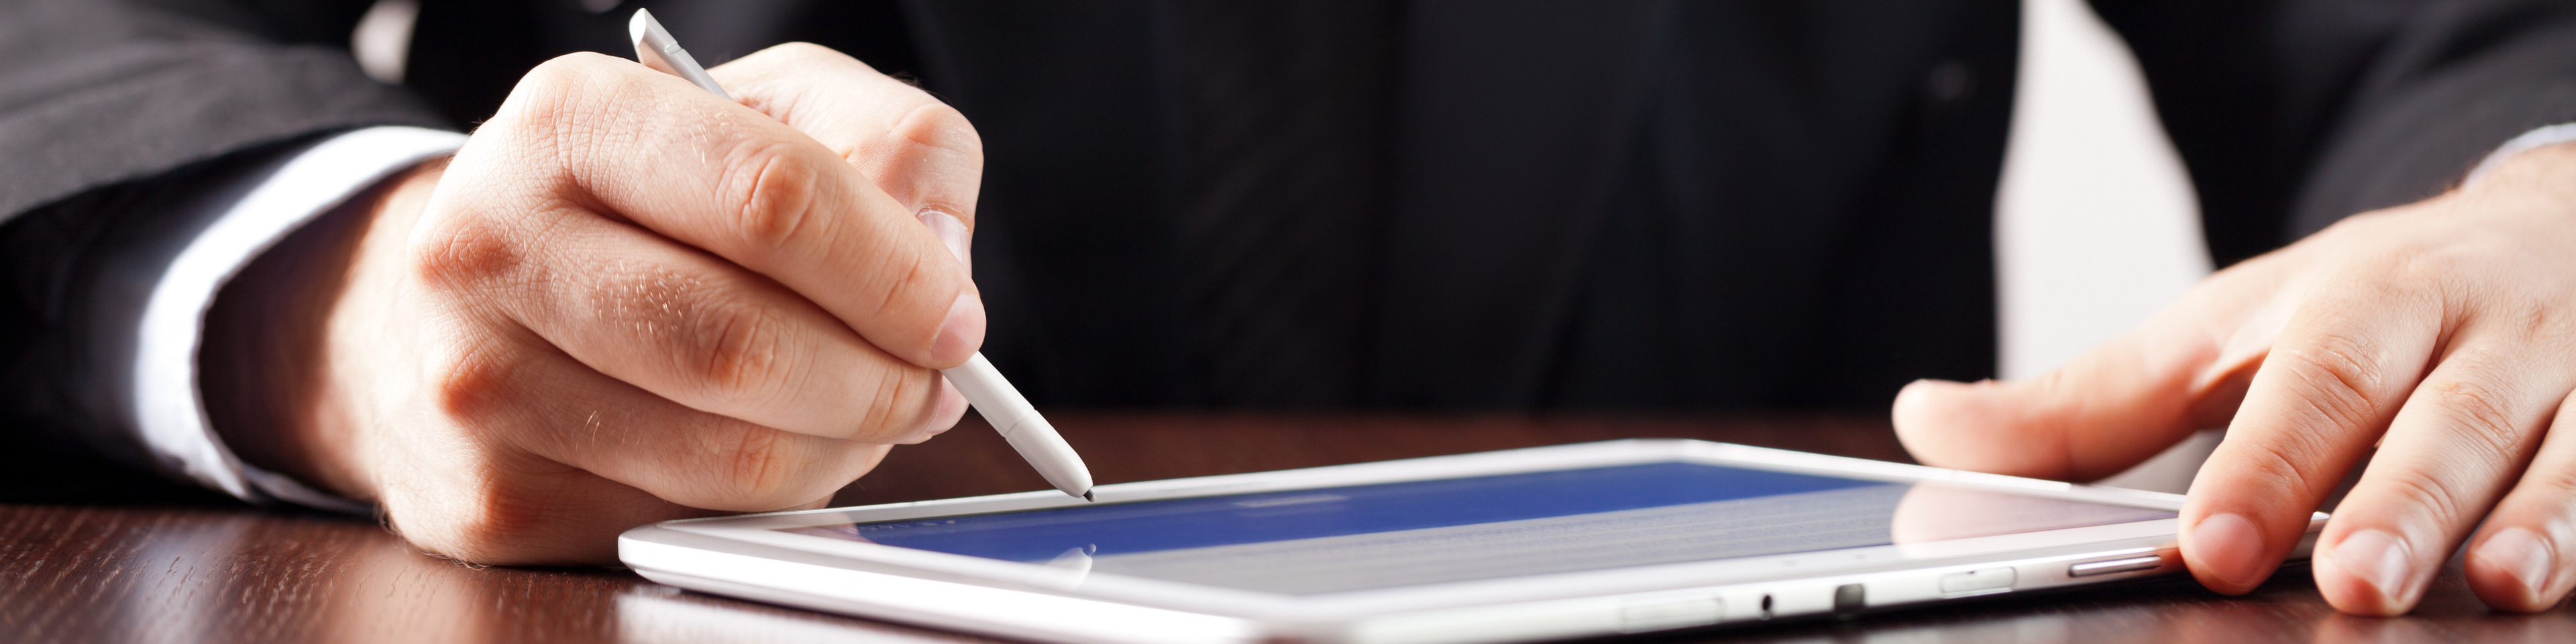 5 questions every legal department must answer before implementing an e-signature tool